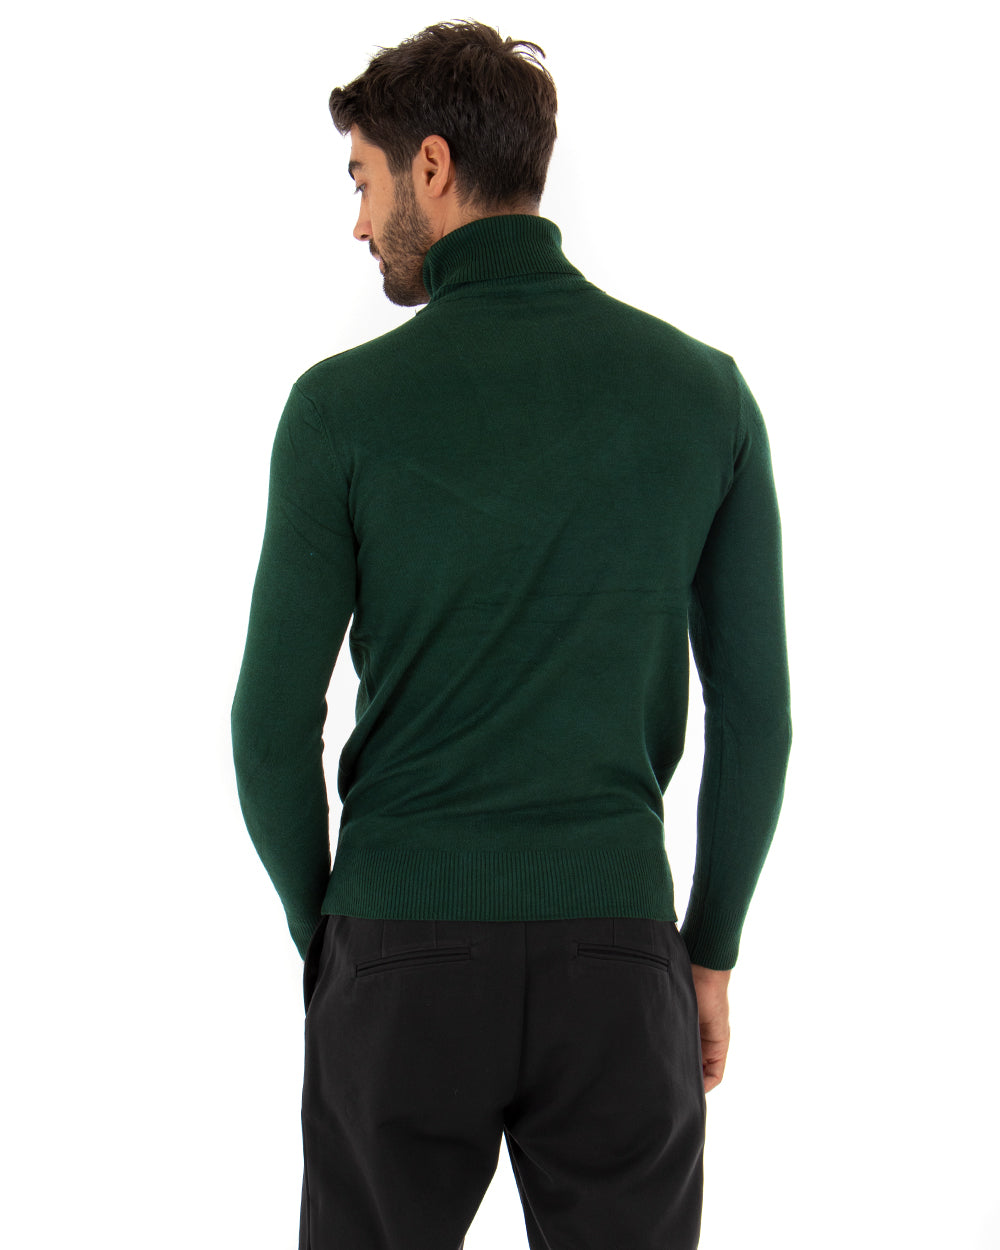 Men's Sweater Long Sleeves Elastic High Neck Solid Color Bottle Green GIOSAL M2548A